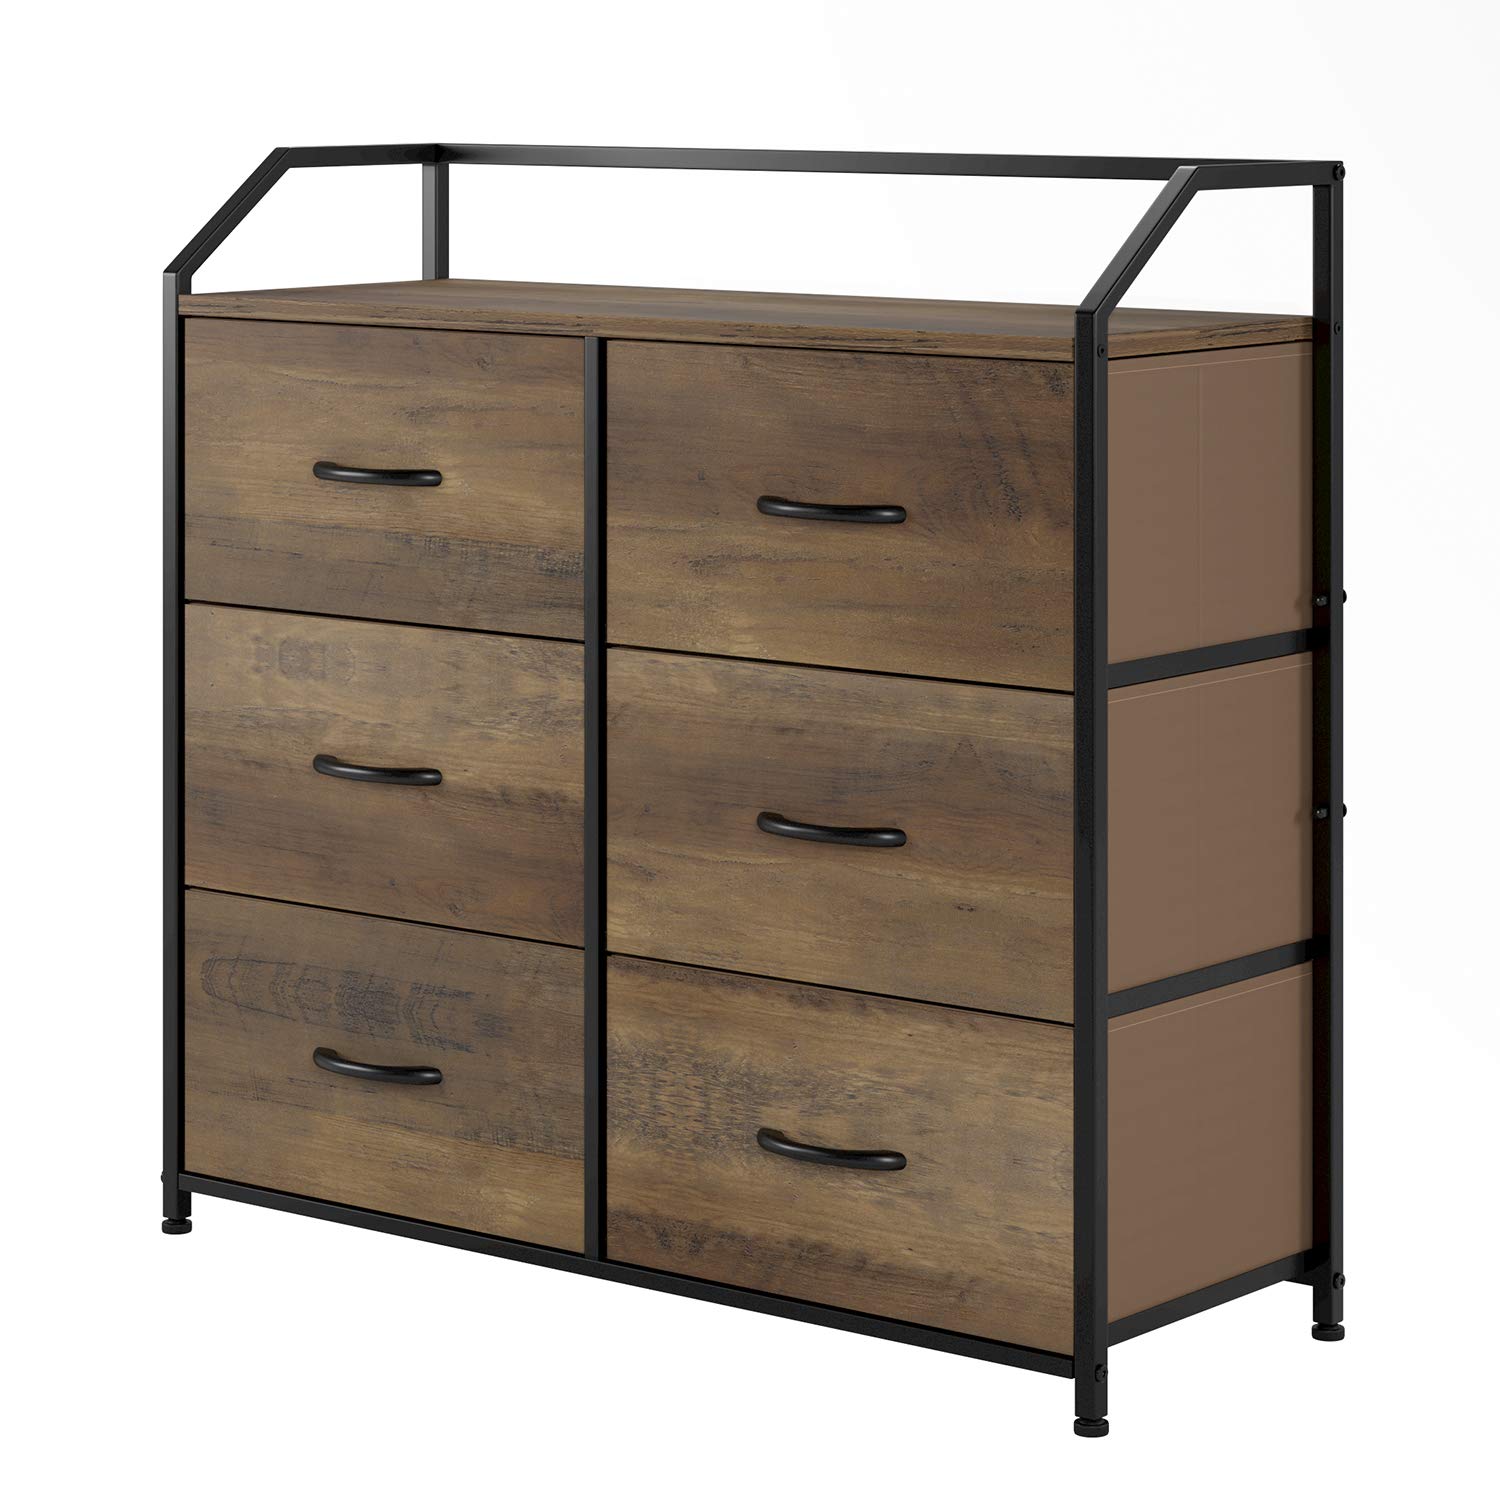 HOMECHO Fabric Dresser with 6 Drawers